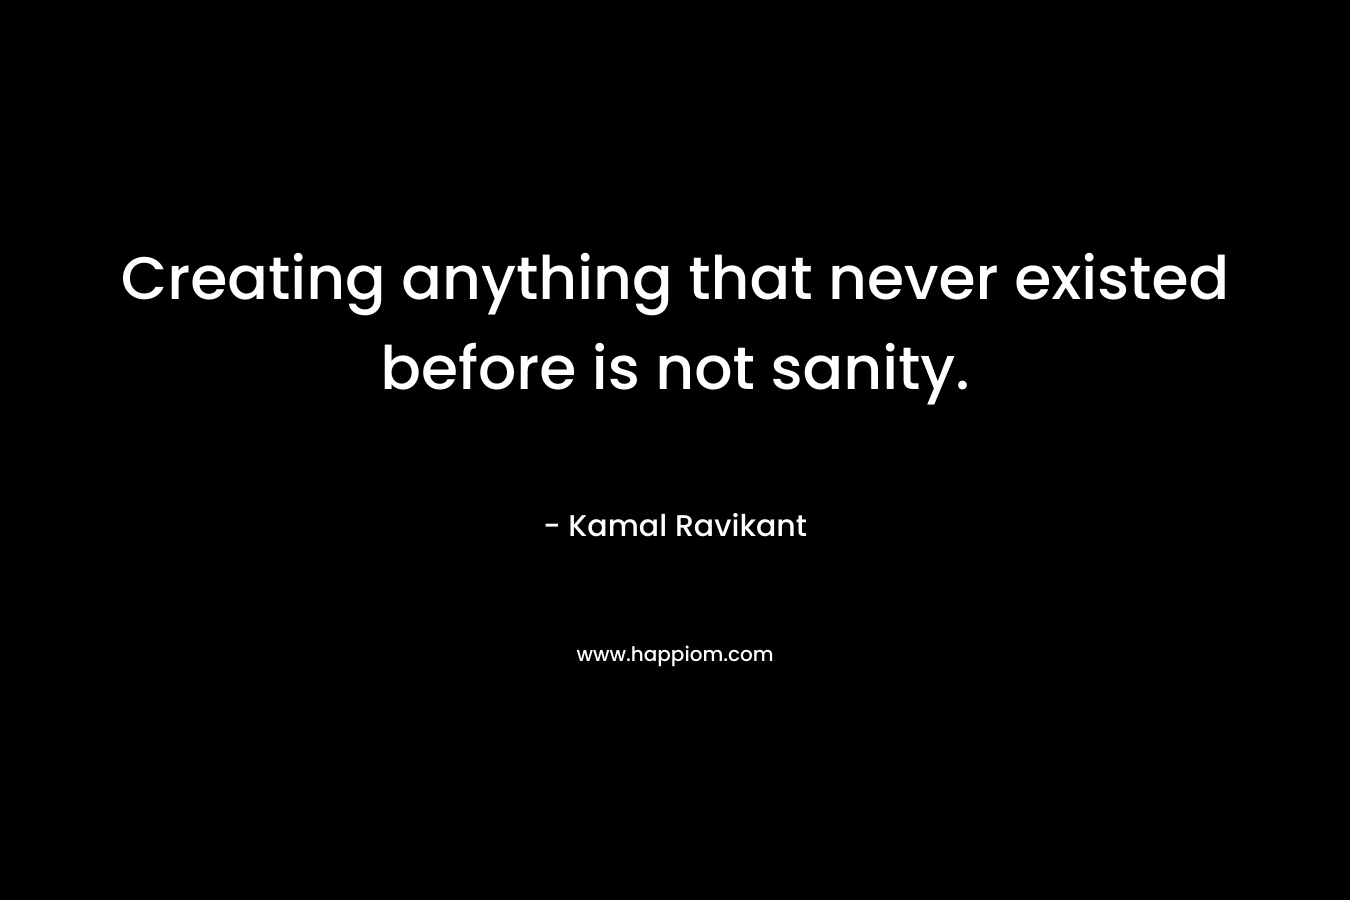 Creating anything that never existed before is not sanity.